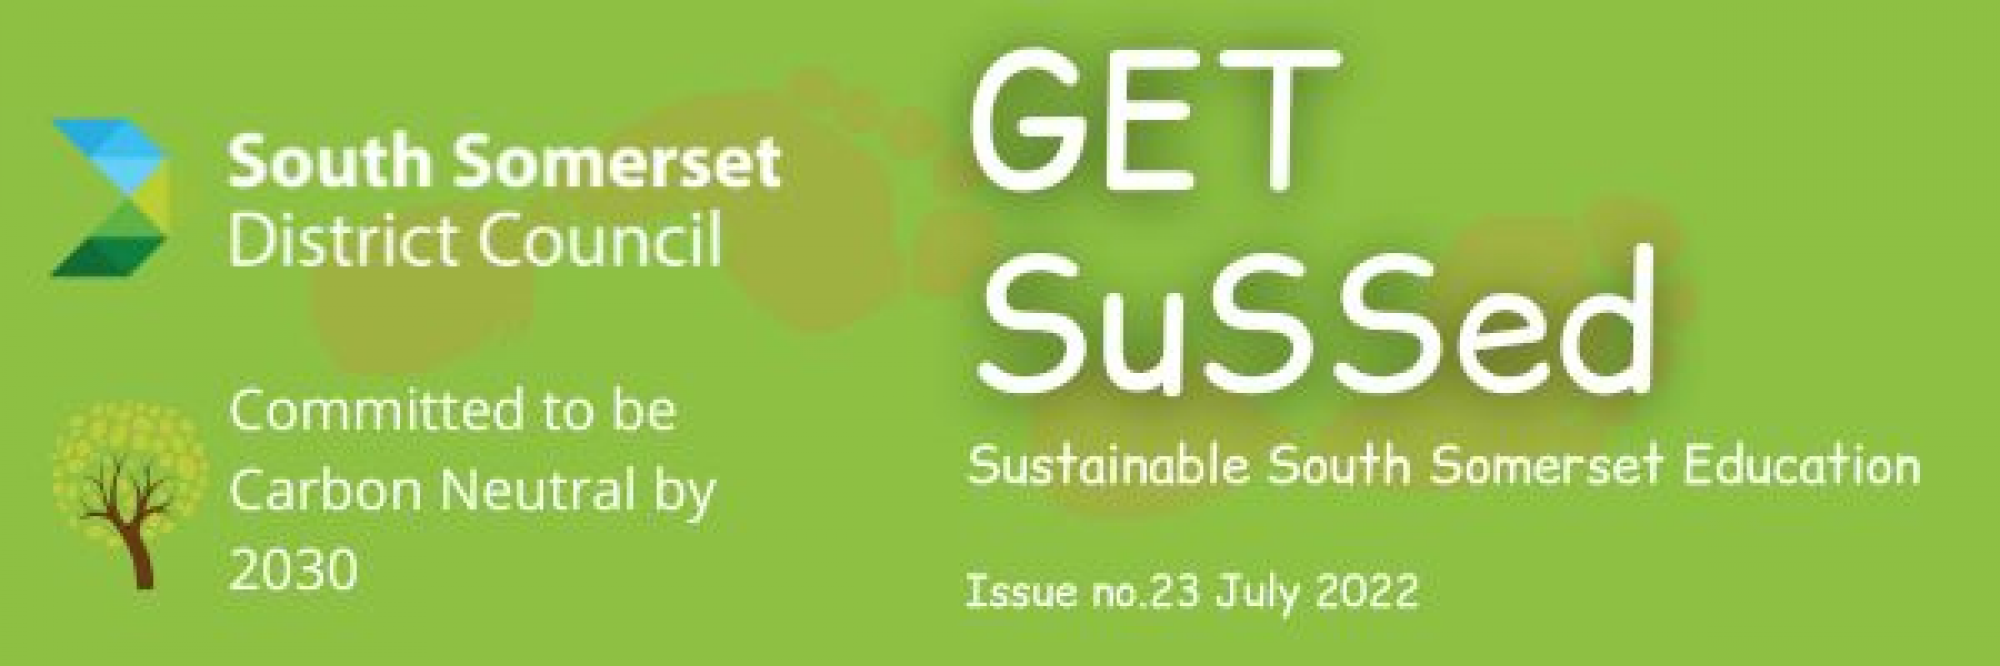 💚One step closer to net-zero! - Get SuSSed from South Somerset District Council 💚